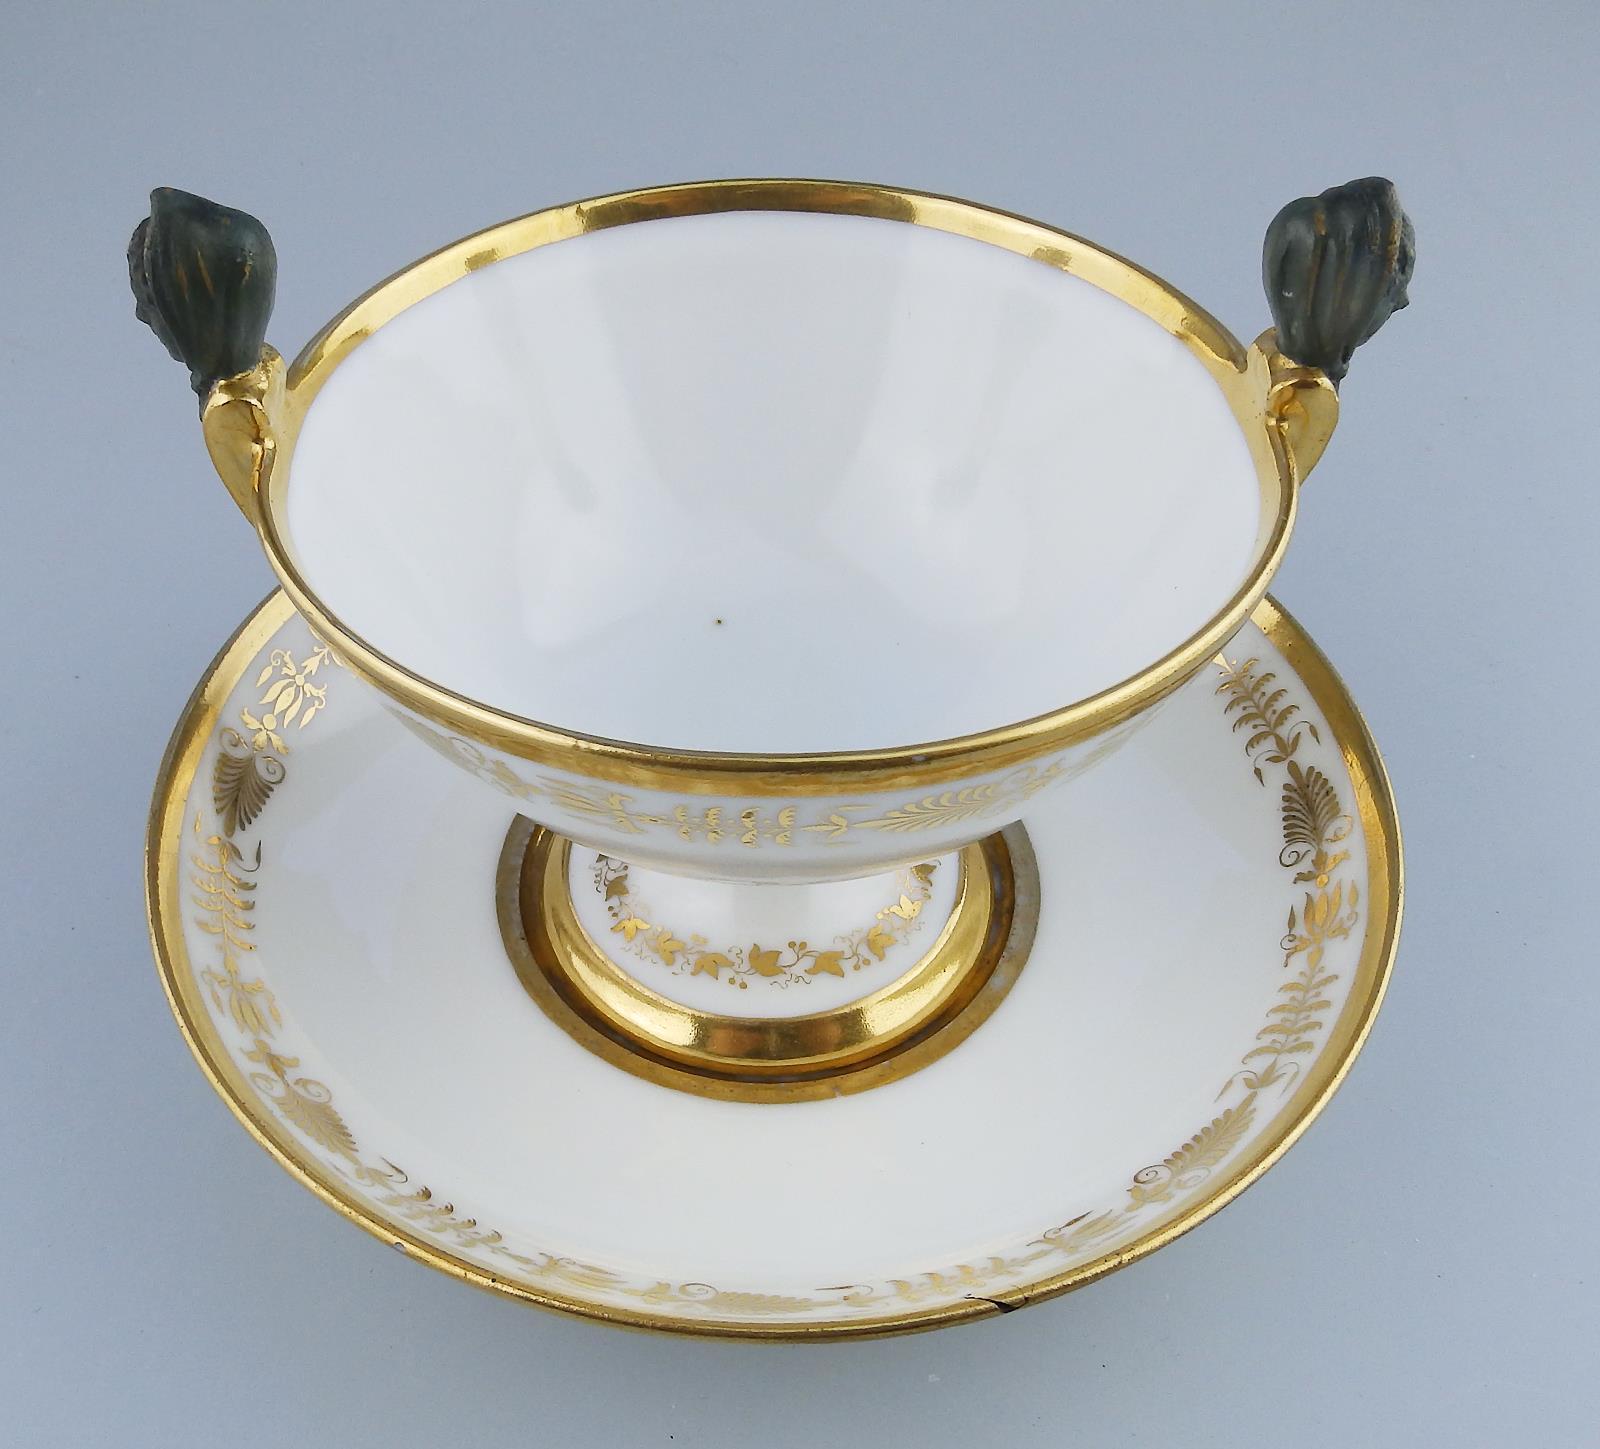 An Extremely rare French Dihl / Old Paris Porcelain Bowl & Saucer C.1795+ - Image 6 of 11